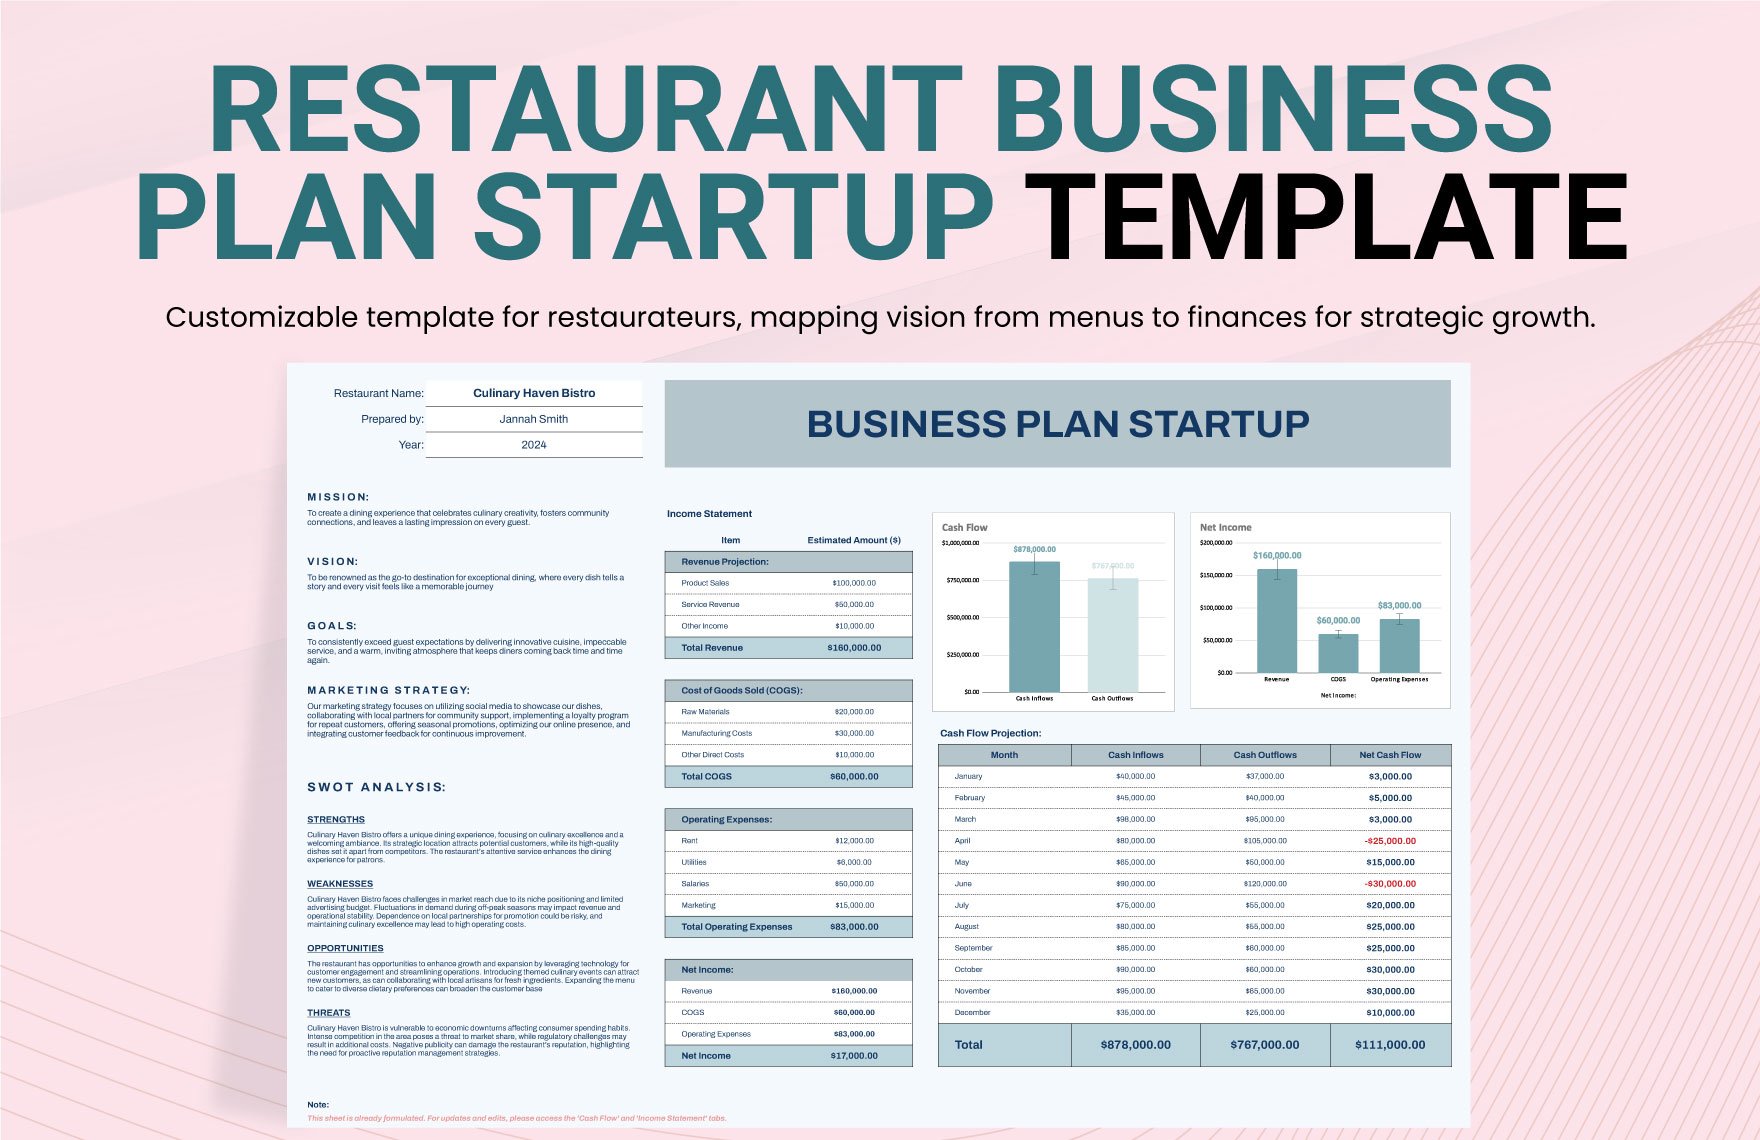 Restaurant Business Plan Startup Template in Excel, Google Sheets